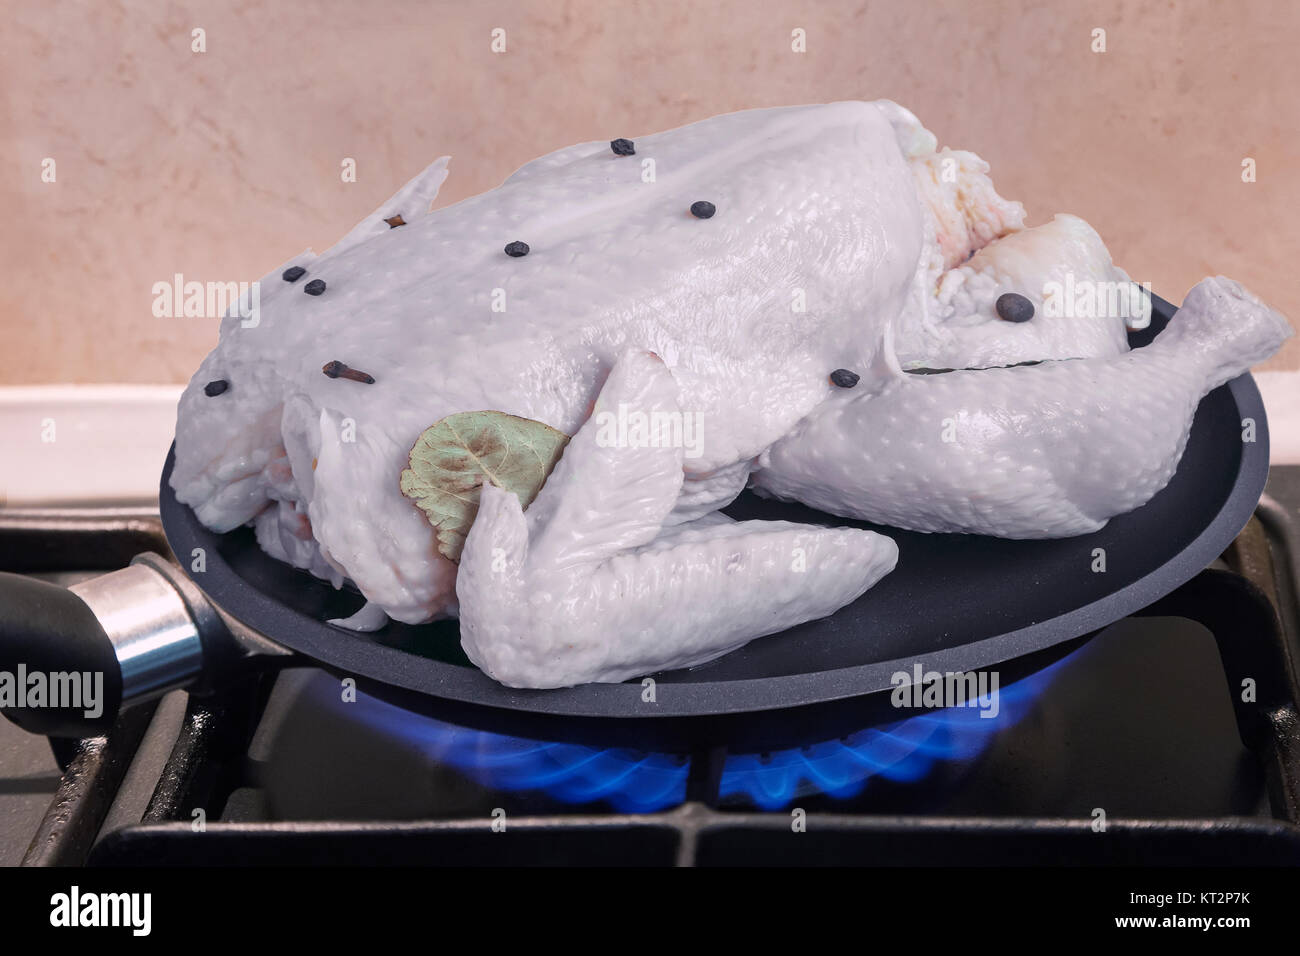 https://c8.alamy.com/comp/KT2P7K/on-fire-gas-stove-a-frying-pan-with-the-chicken-prepared-for-roasting-KT2P7K.jpg